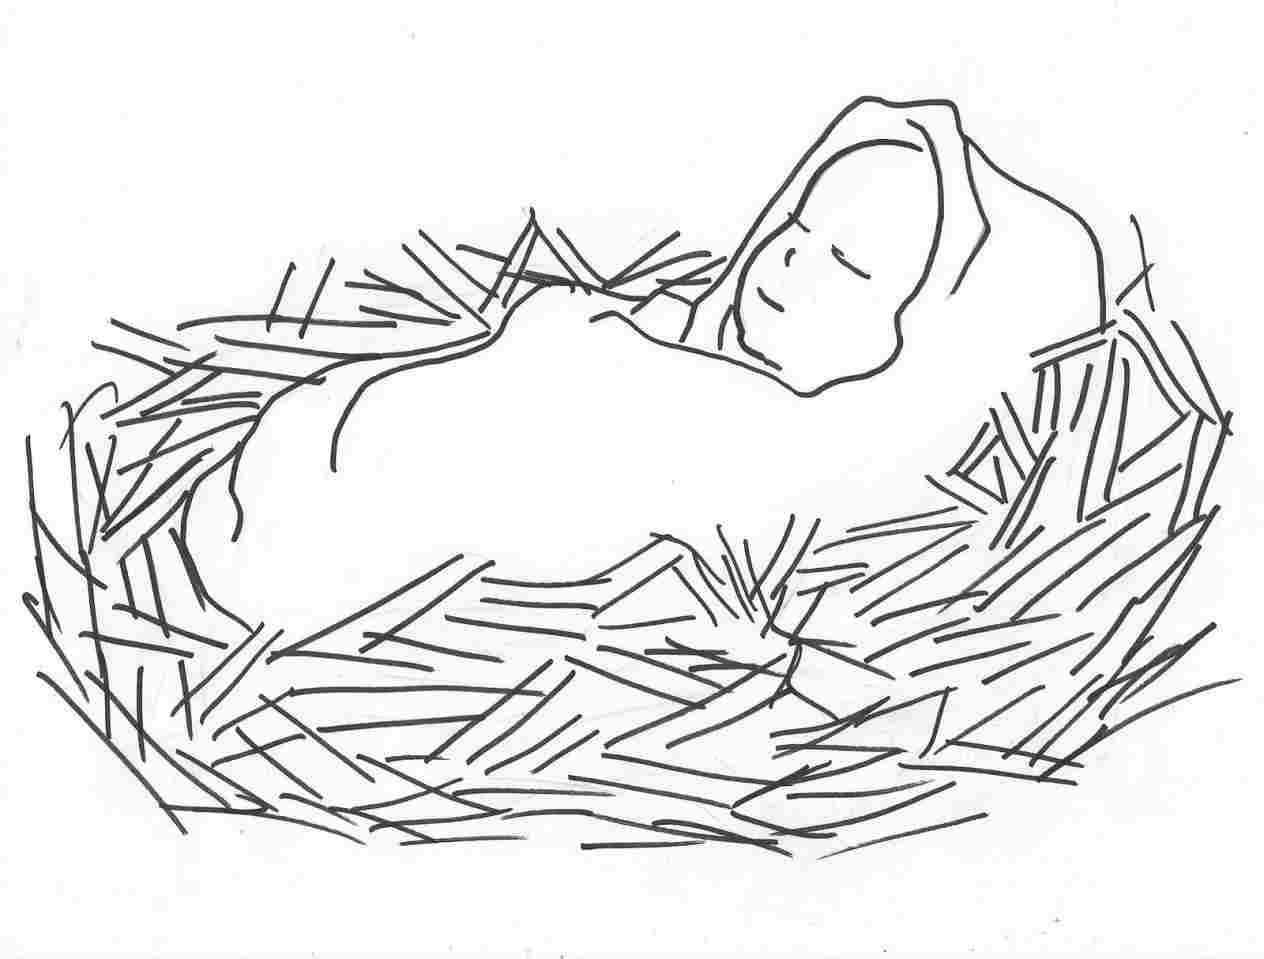 The Nativity Drawing Sketch